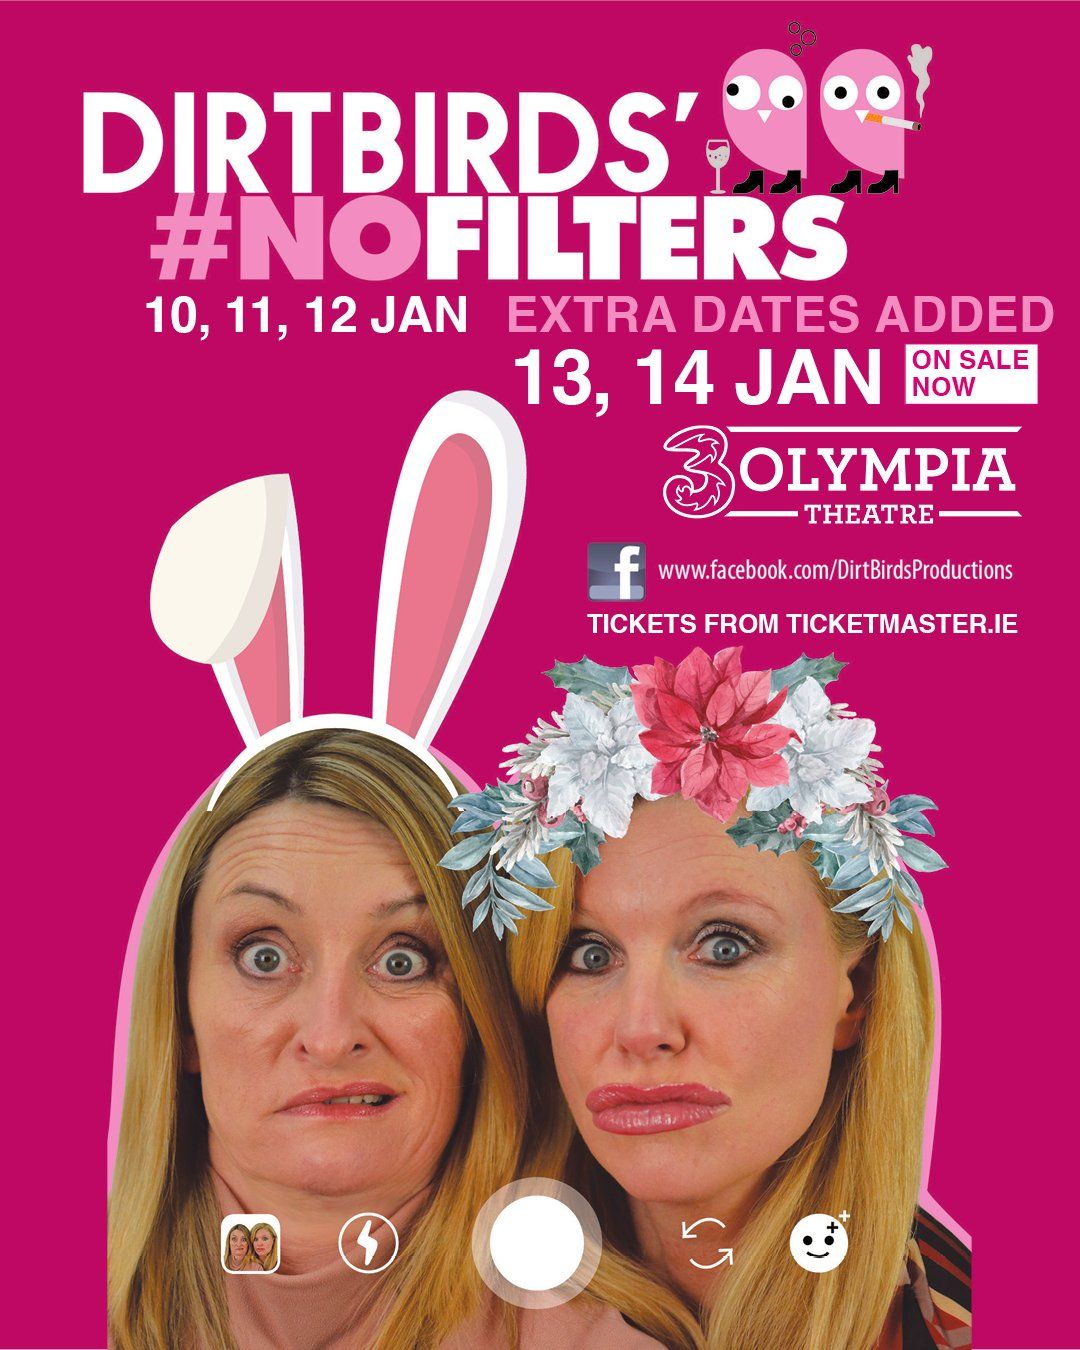 DIRTBIRDS  #NOFILTERS SHOW  DUE TO DEMAND EXTRA DATES AT 3OLYMPIA THEATRE ON 13 and 14 JANUARY 2023